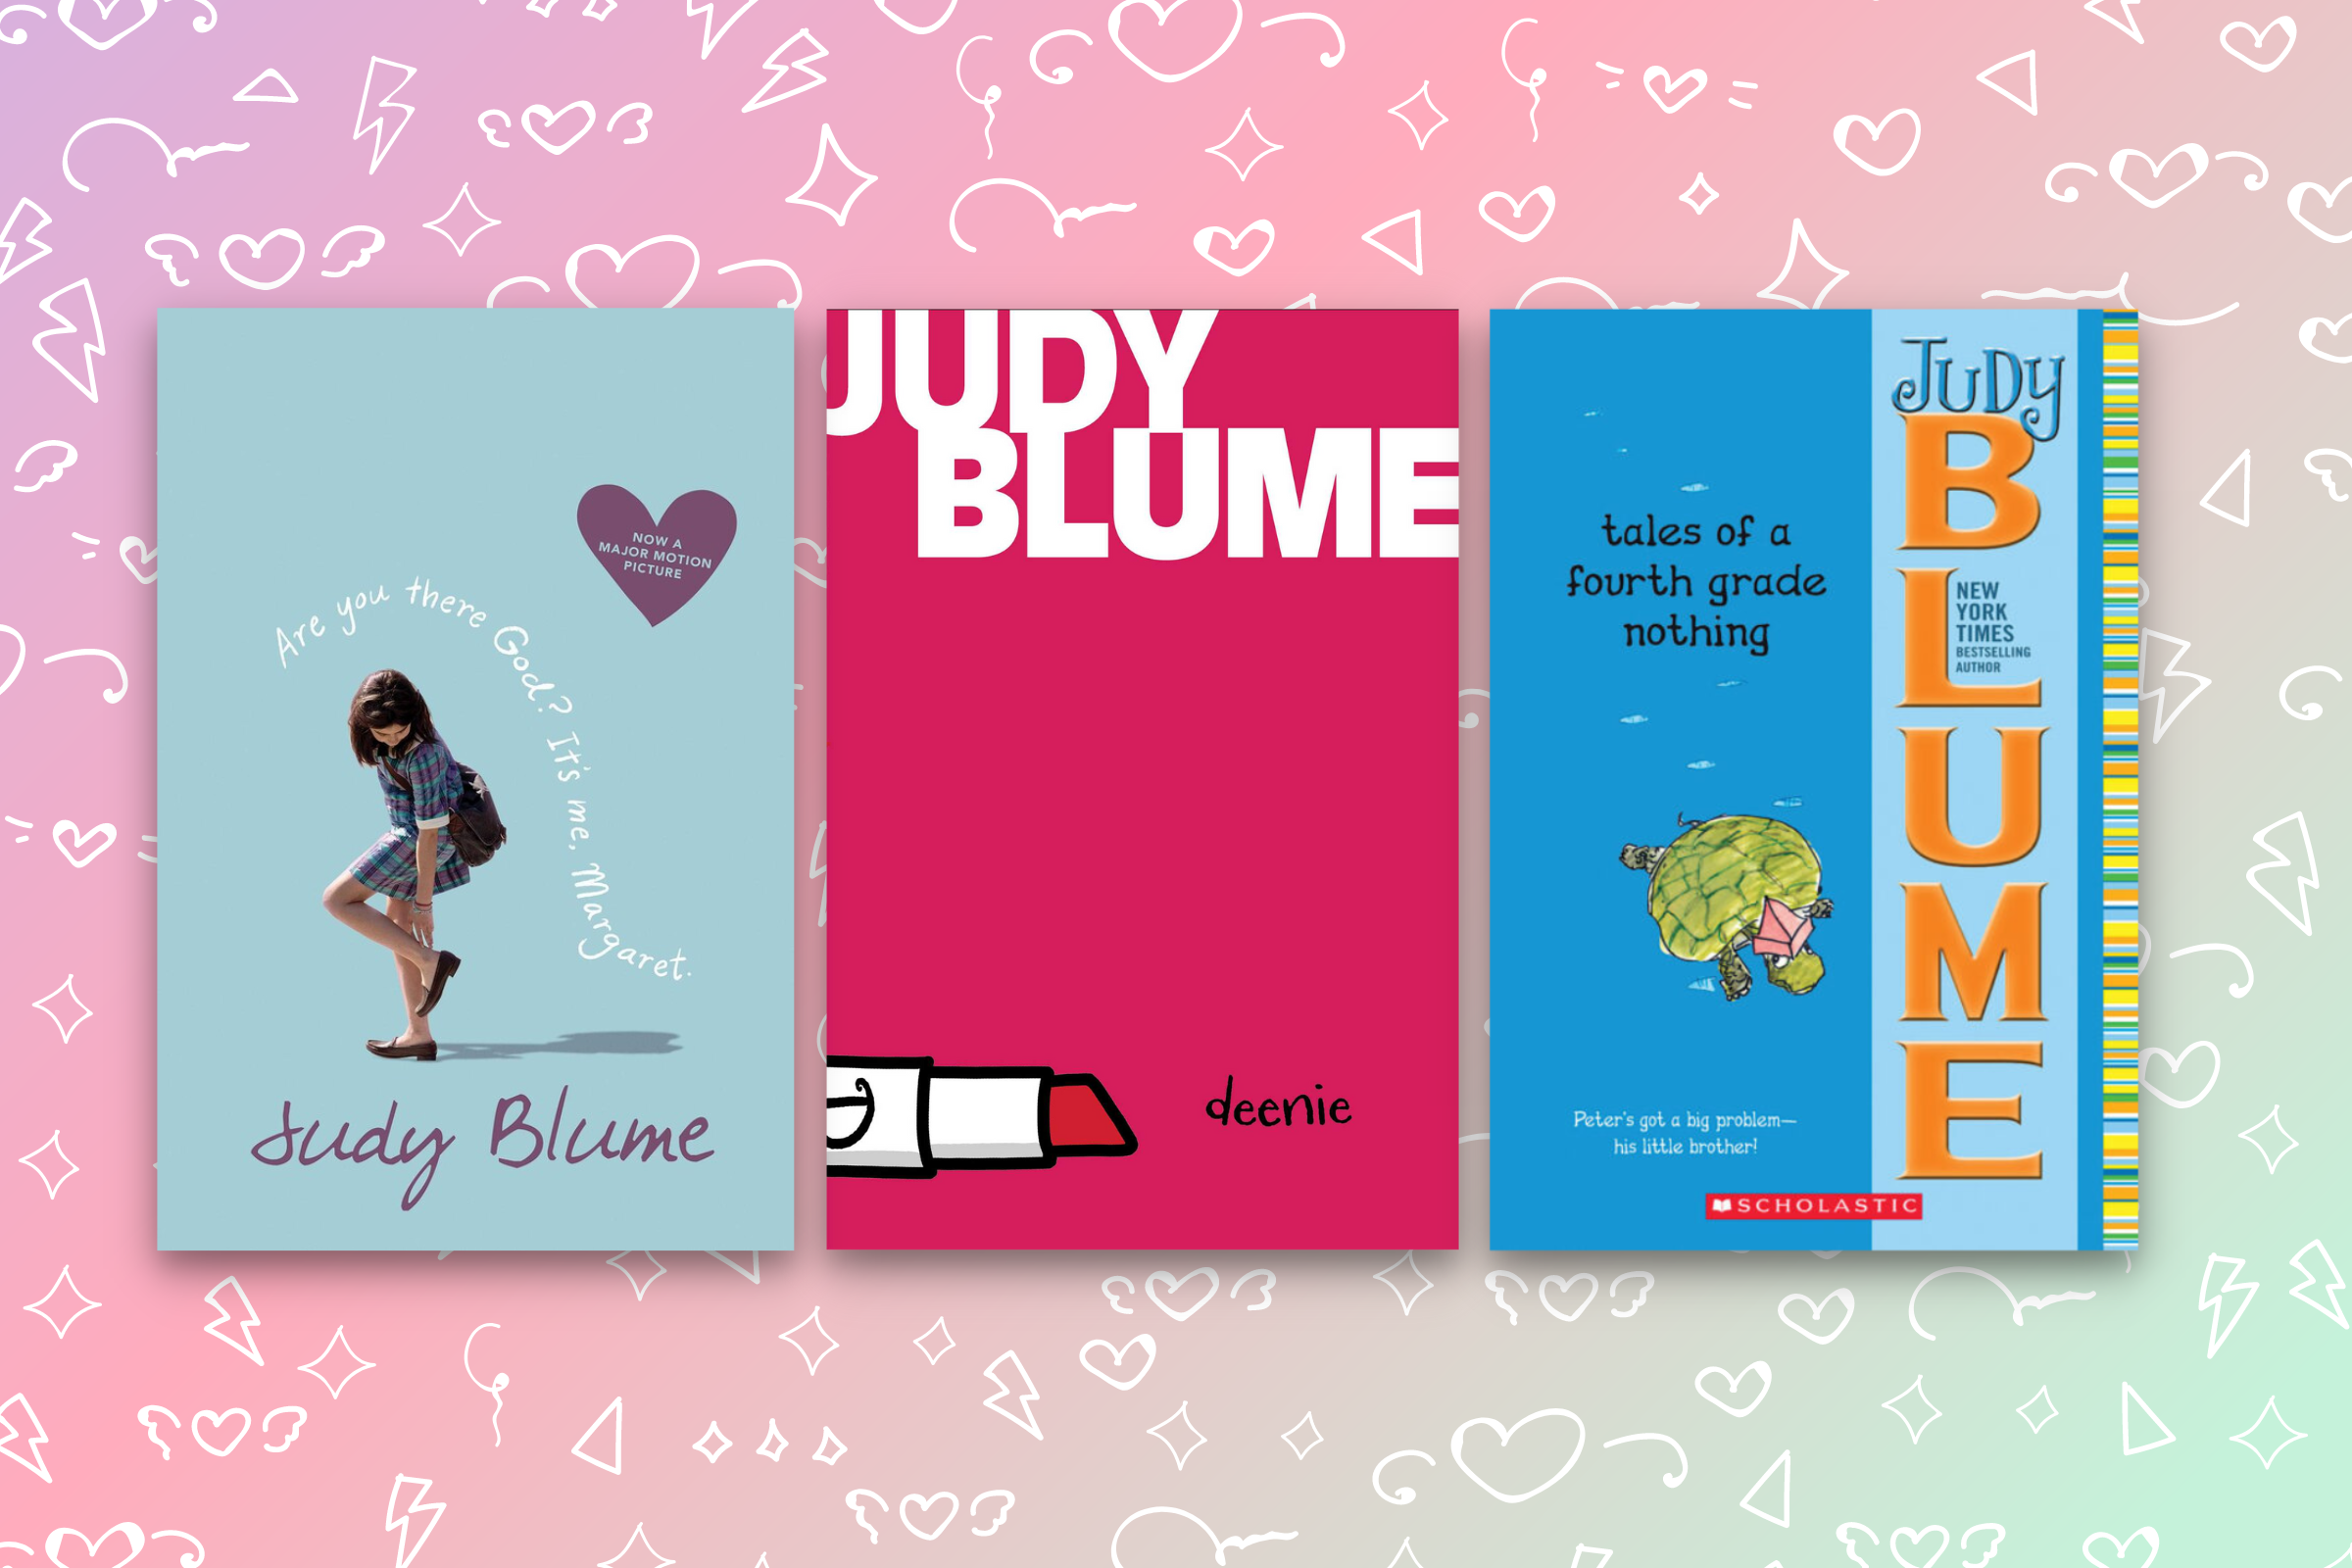 Judy Blume's work has become beloved for its forthright honesty—and garnered plenty of controversy for its refusal to gloss over topics like sex and periods.